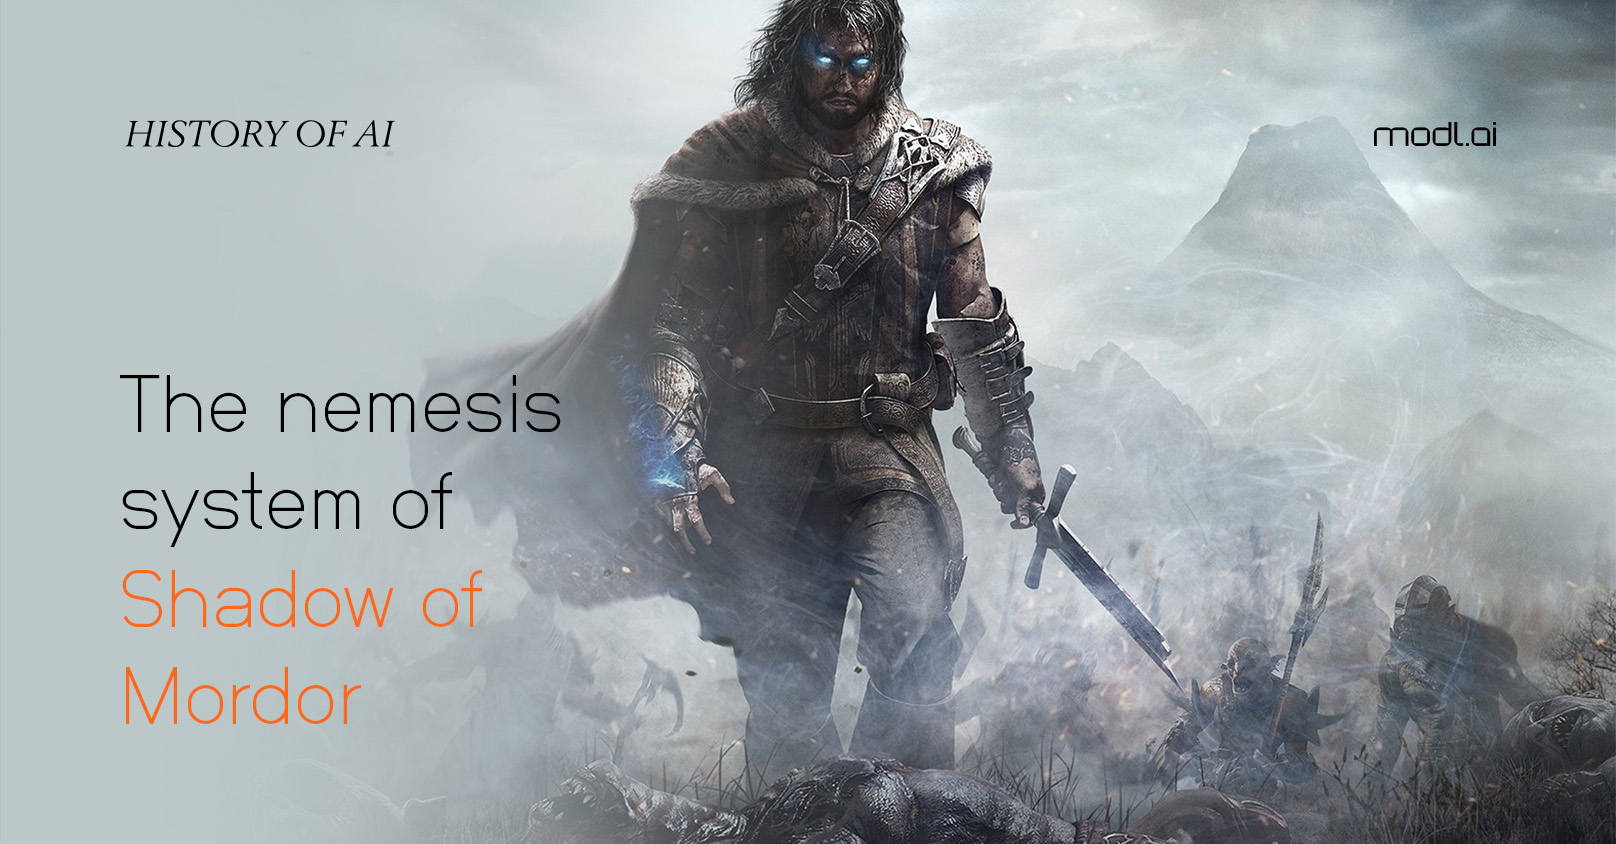 I just don't get Middle-earth: Shadow of Mordor